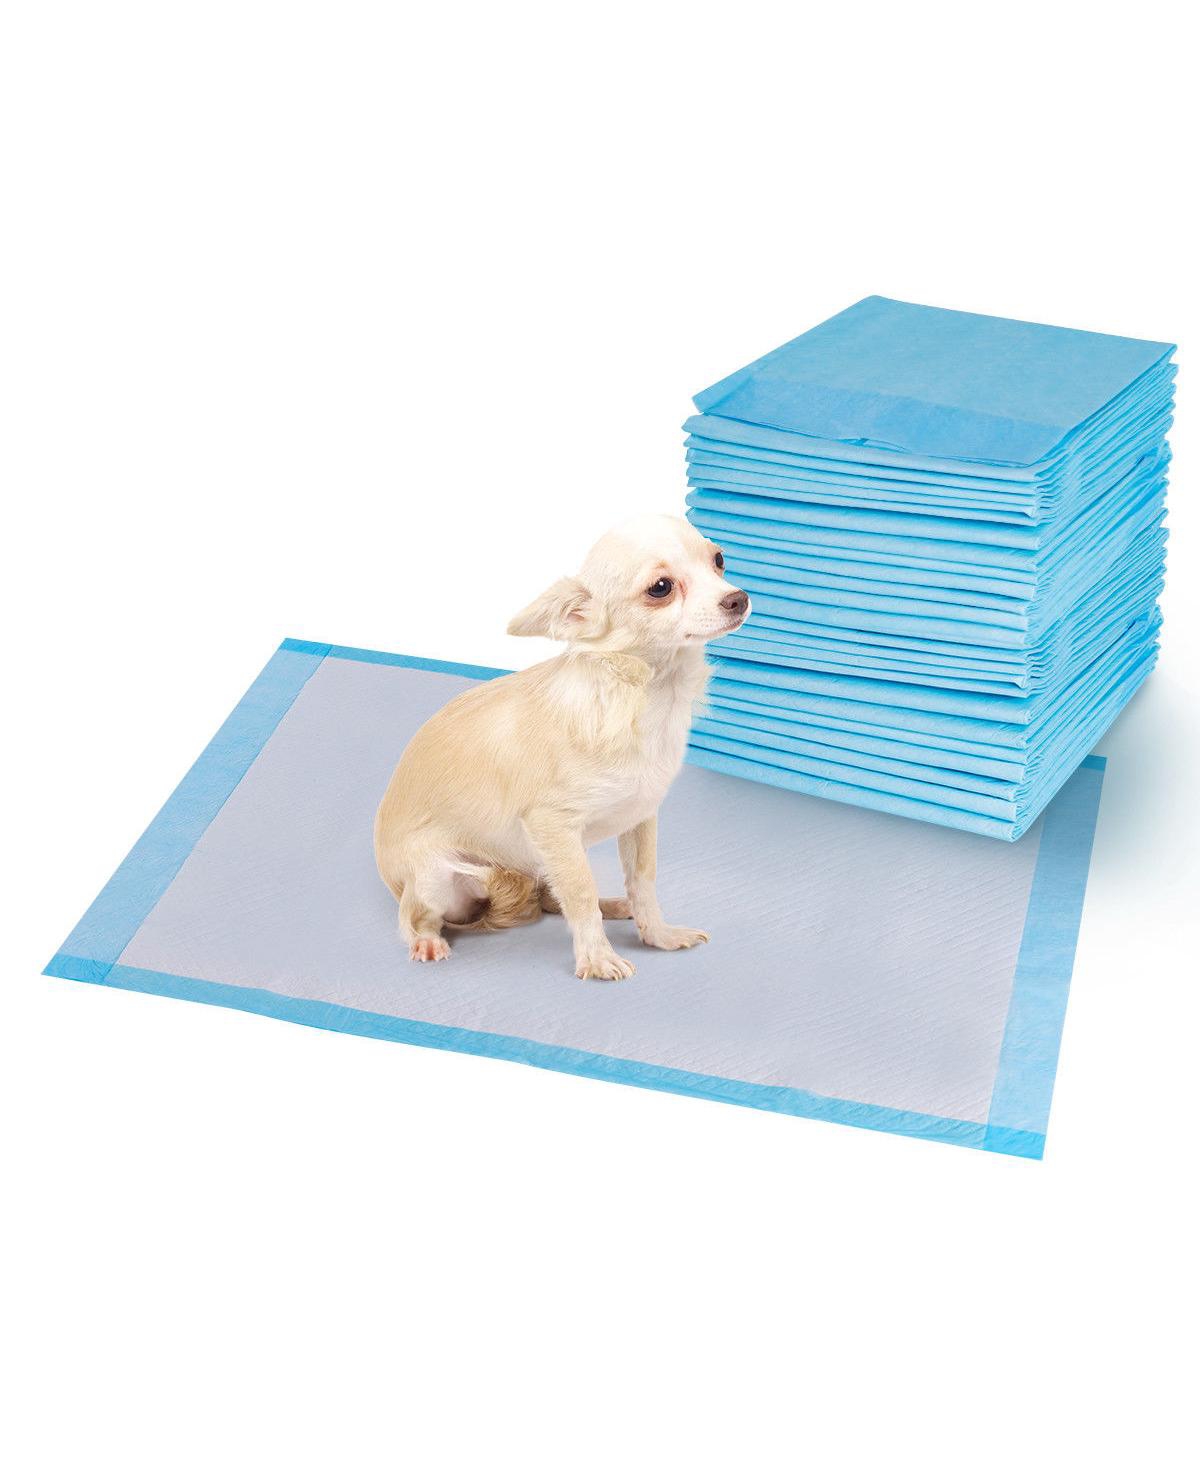 100 Pcs 30''x 36'' Puppy Pet Pads Dog Cat Wee Pee Piddle Pad training underpads - Blue